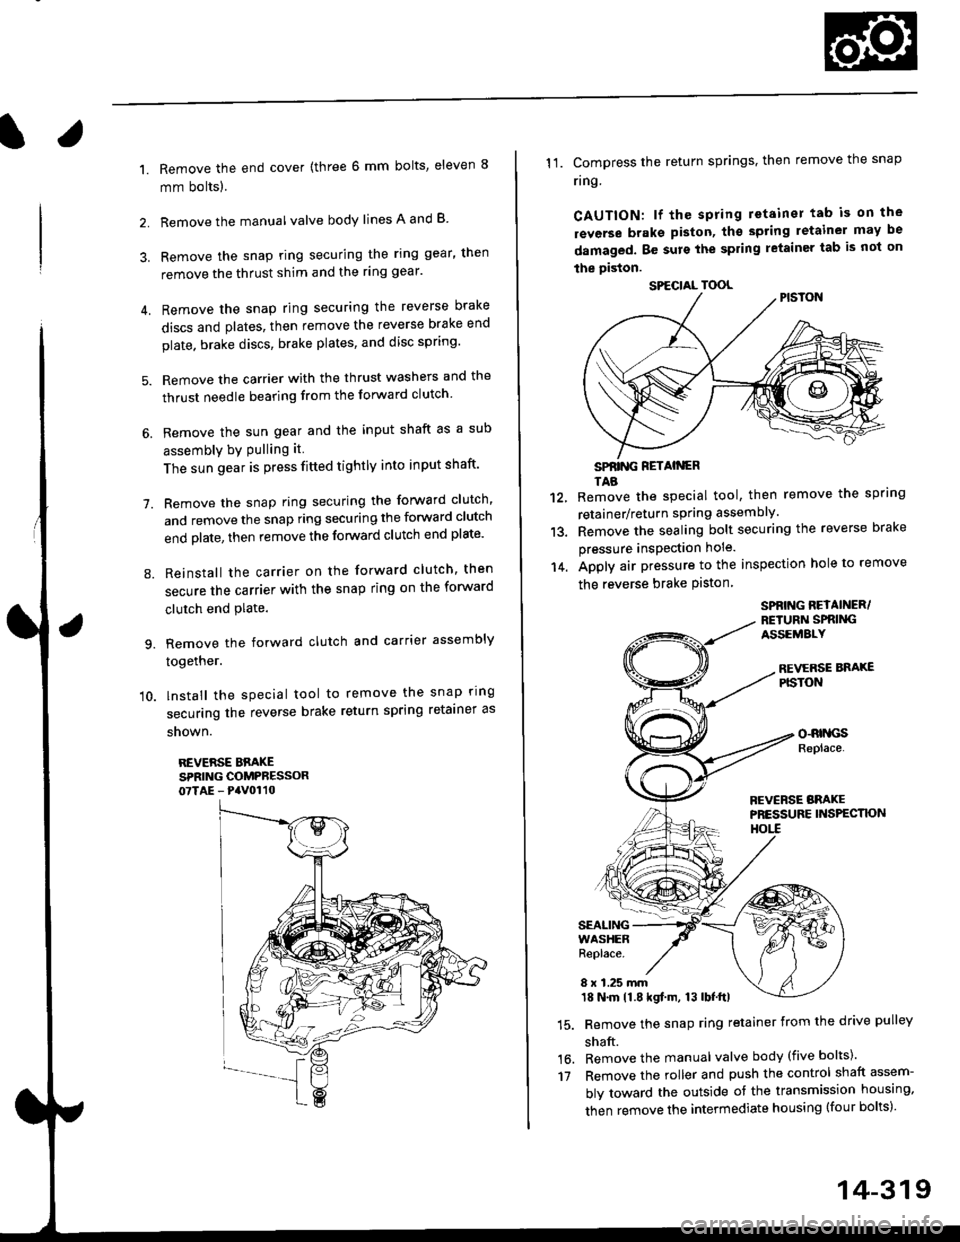 HONDA CIVIC 1996 6.G Workshop Manual l.
1.
2.
Remove the end cover {three 6 mm bolts, eleven 8
mm bolts).
Remove the manualvalve body lines A and B
3. Remove the snap ring securing the ring gear, then
remove the thrust shim and the ring 